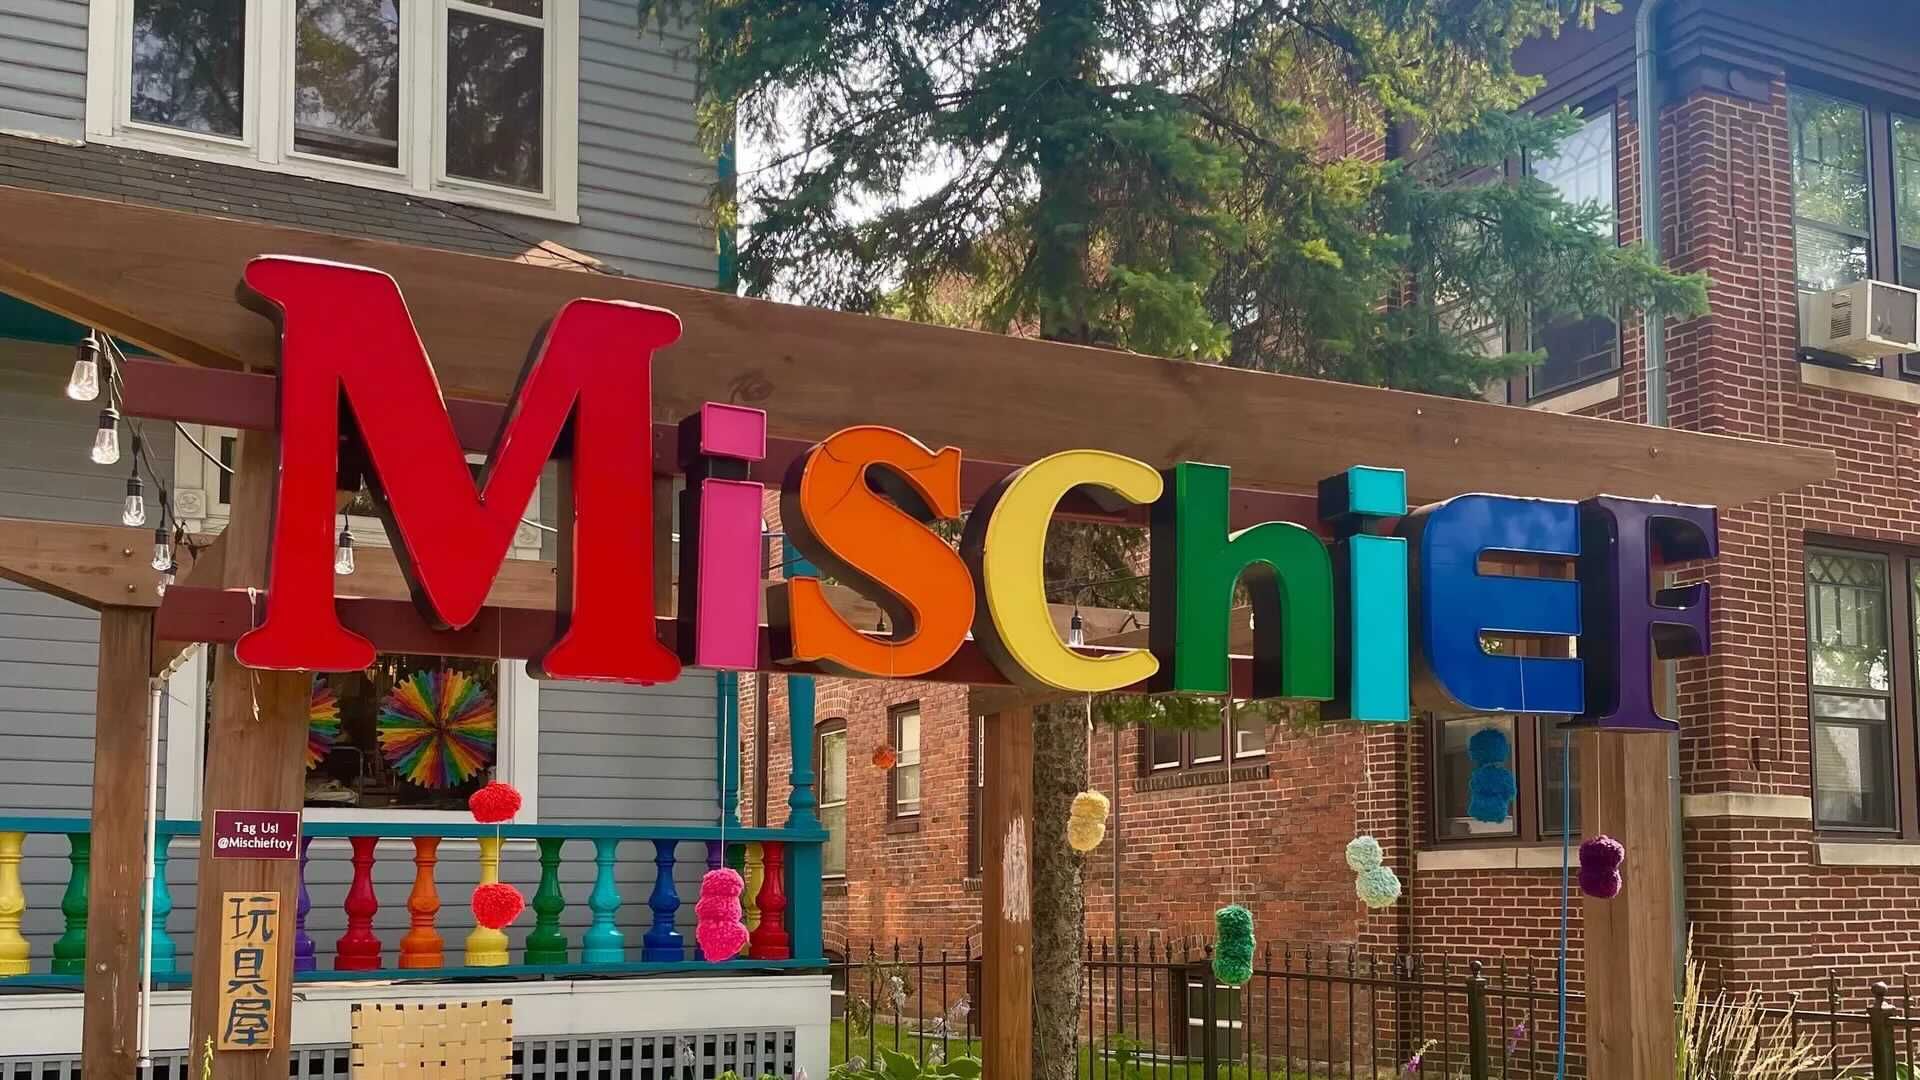 The word mischief in rainbow letters